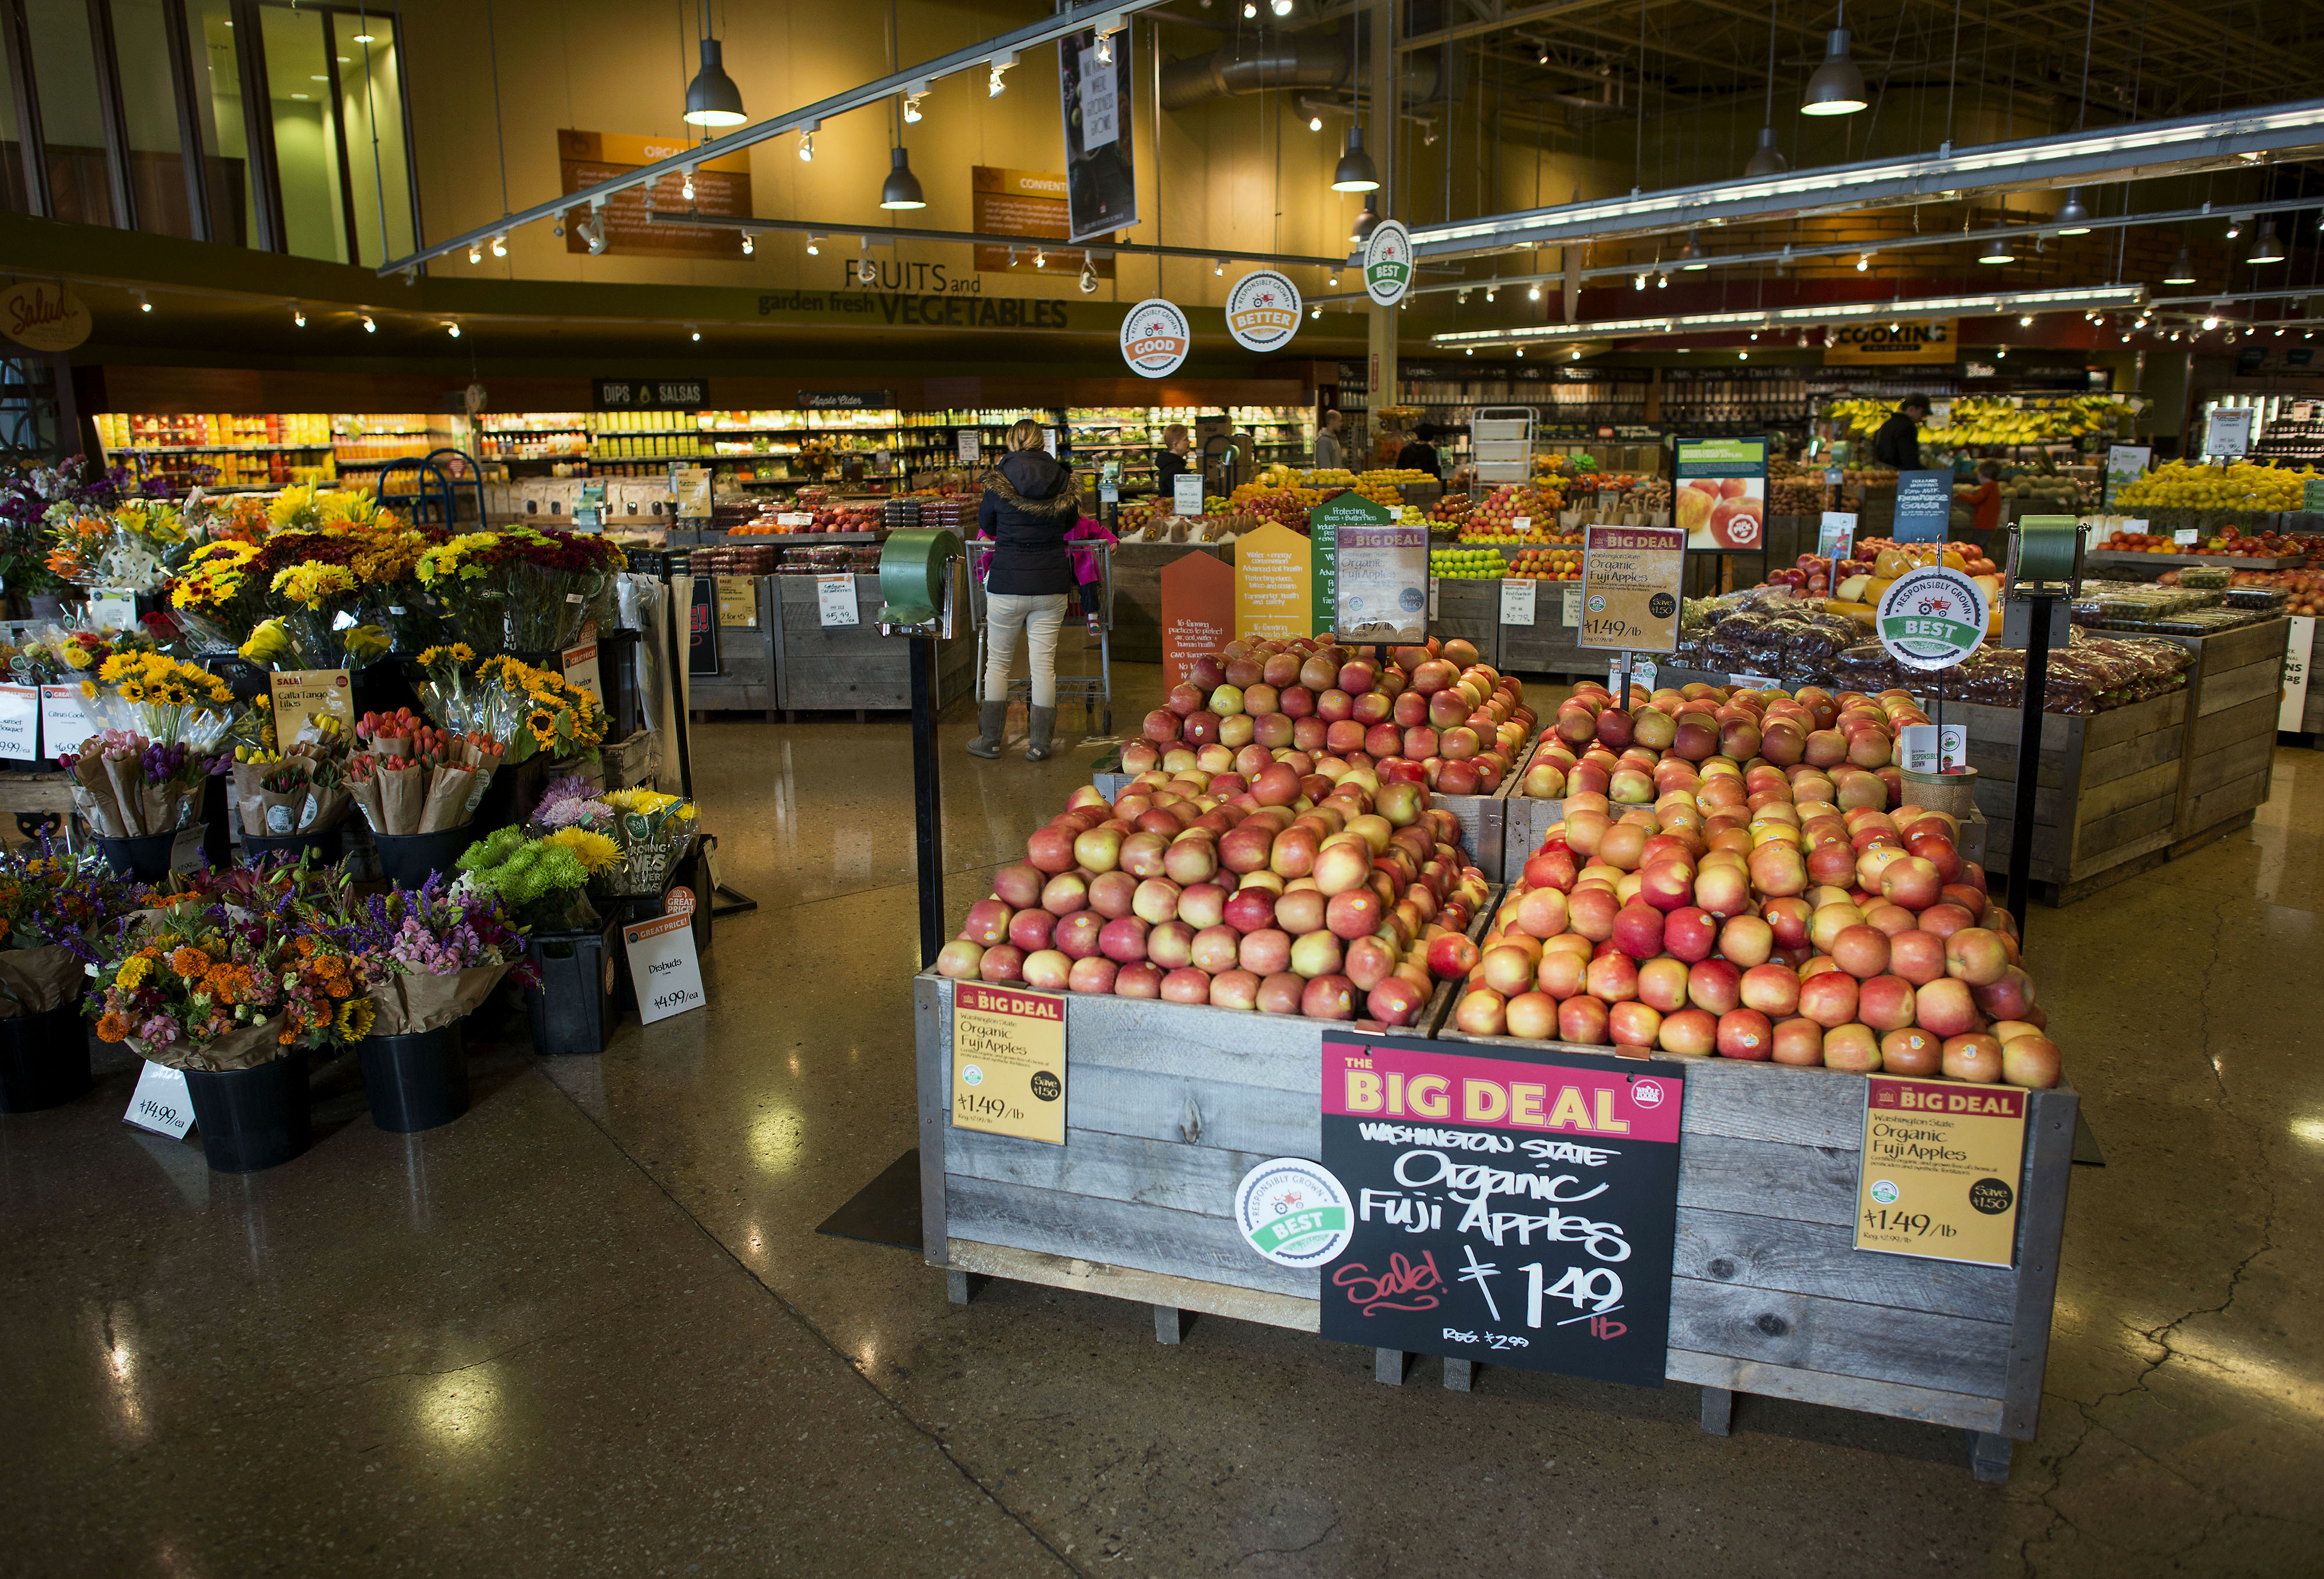 Customers shop in the produce section of a Whole Foods Market Inc. store in Dublin, Ohio, U.S., on Friday, Nov. 7, 2014.